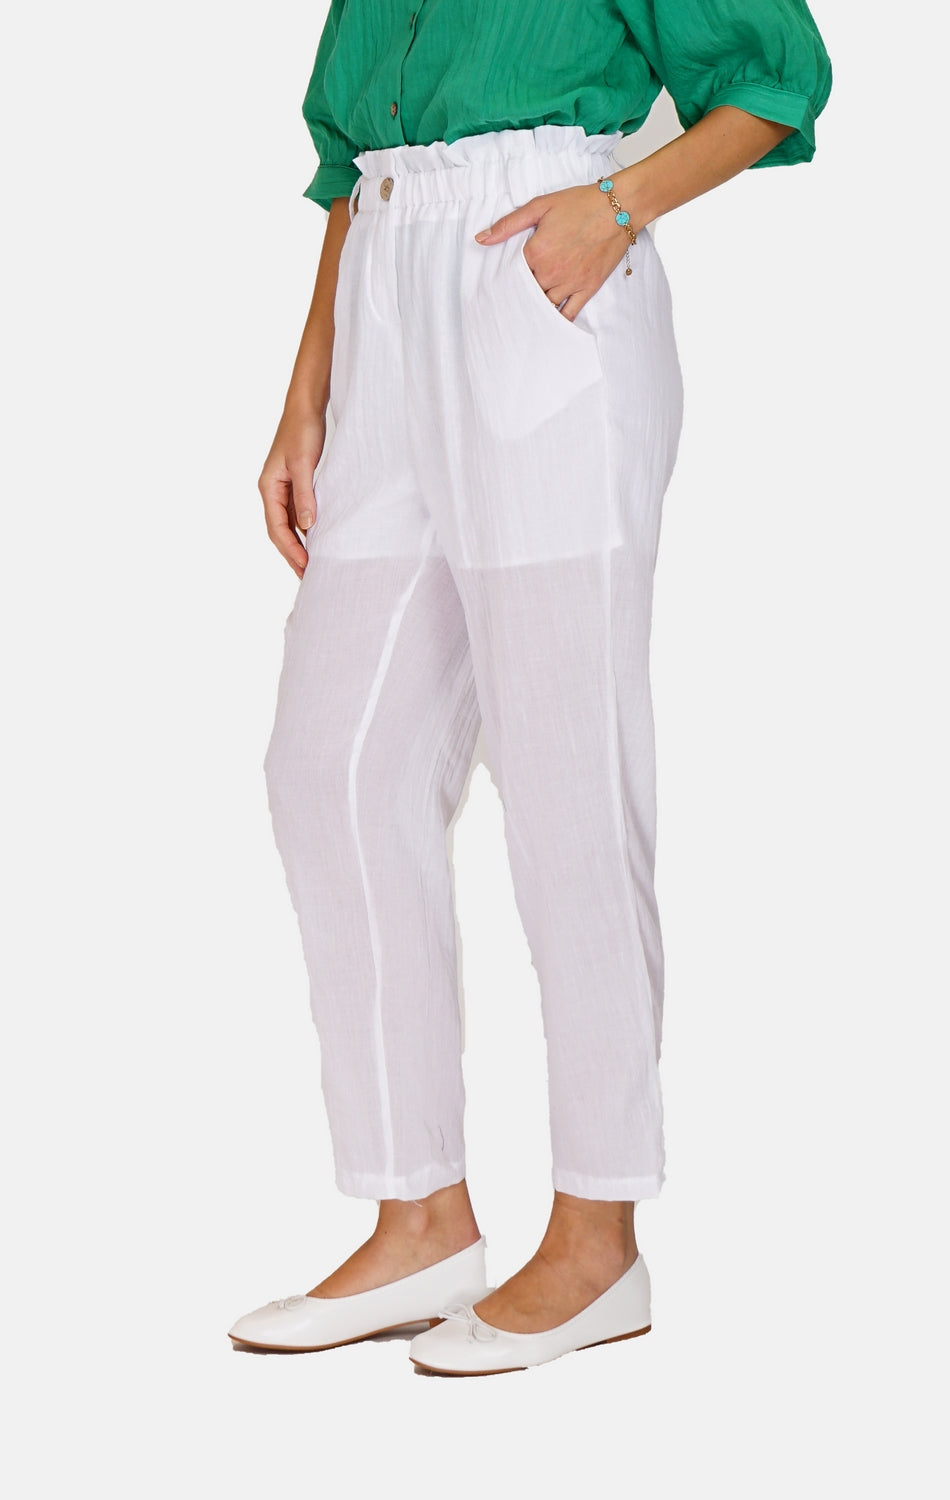 Trousers with pockets on the sides, buttons on the front, high waist